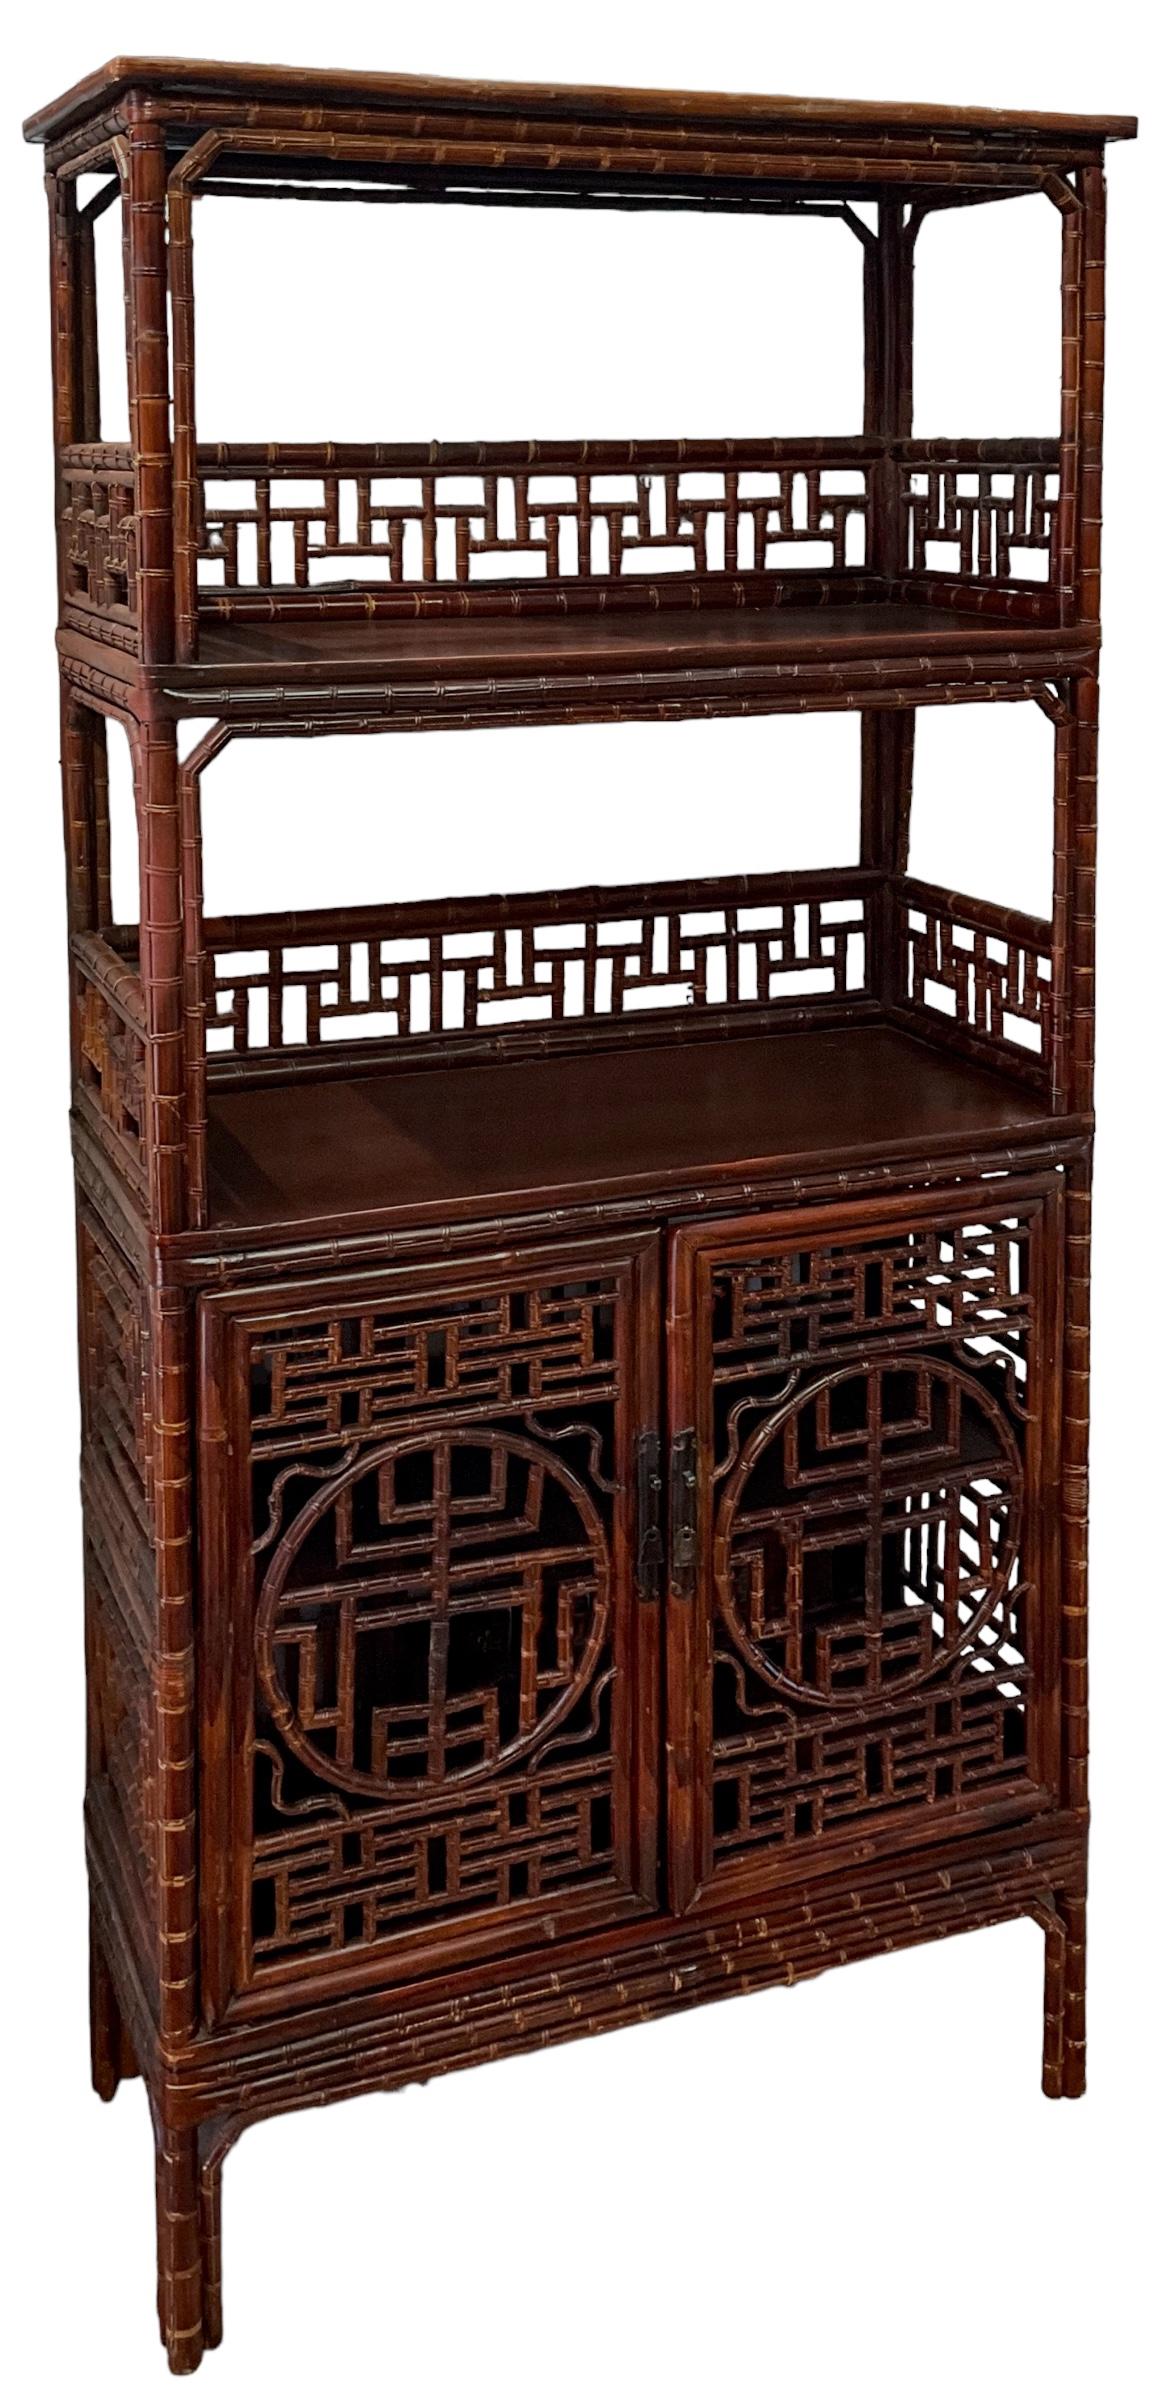 This is such a versatile piece! It is an antique Chinese bamboo cabinet with ornate fretwork and original hardware. I love that the bottom portion opens to storage. The shelves are sturdy, and the frame is as well. It is unmarked. 

My shipping is